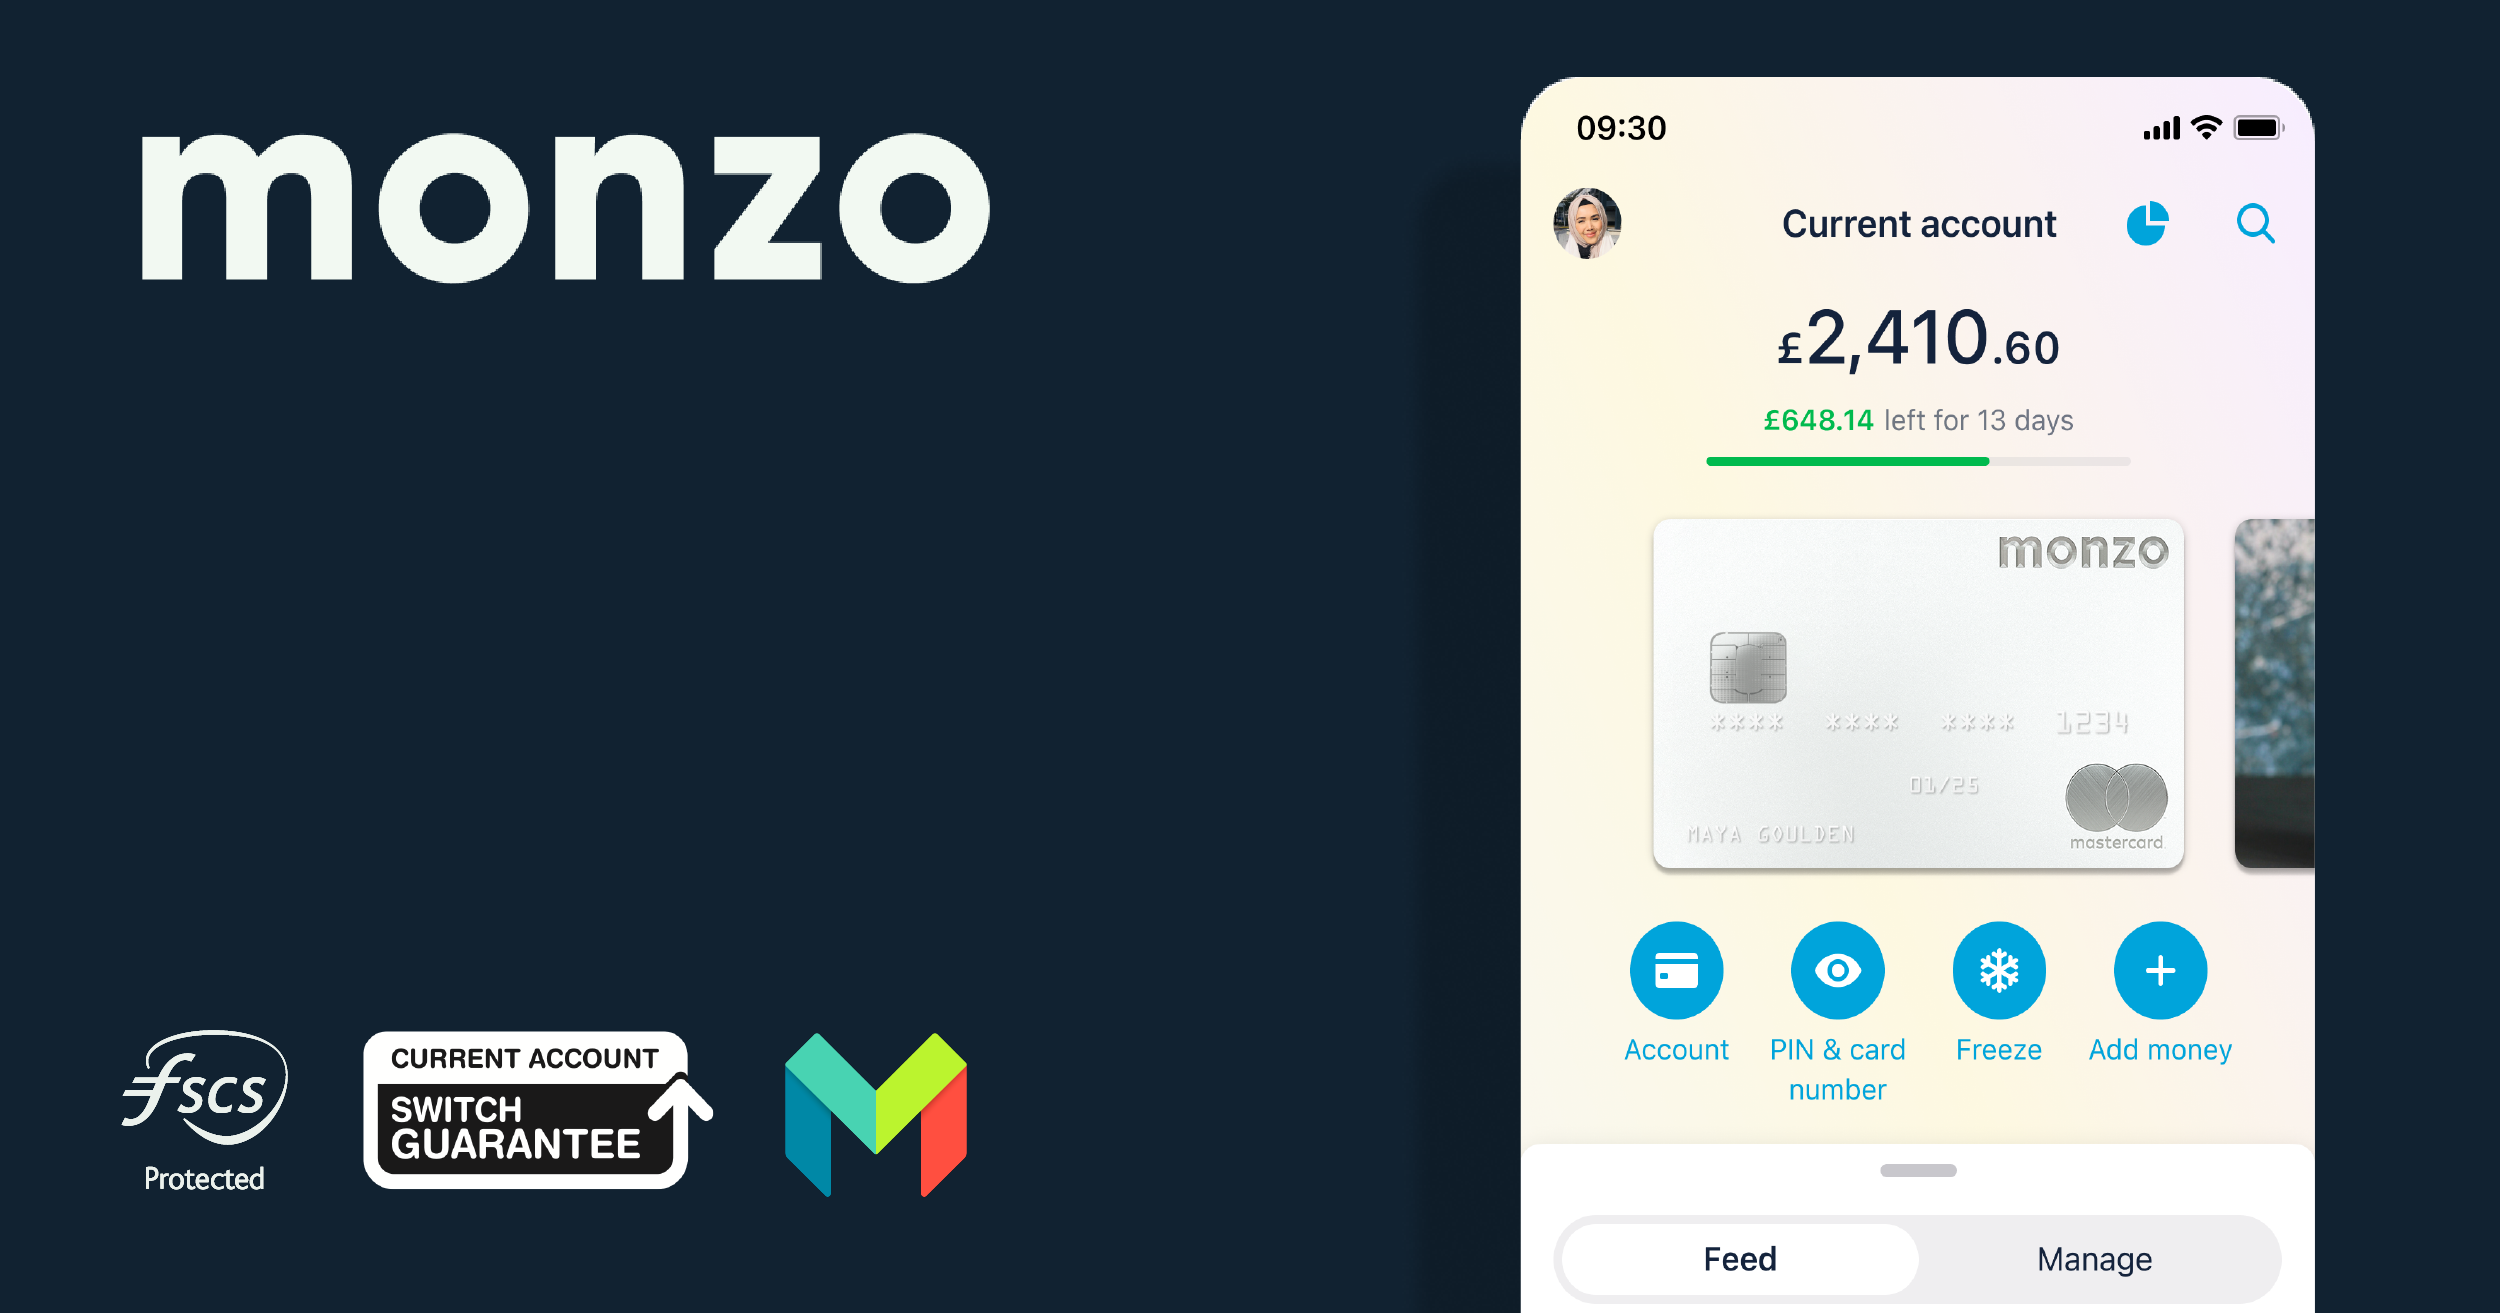 monzo premium travel insurance who is covered